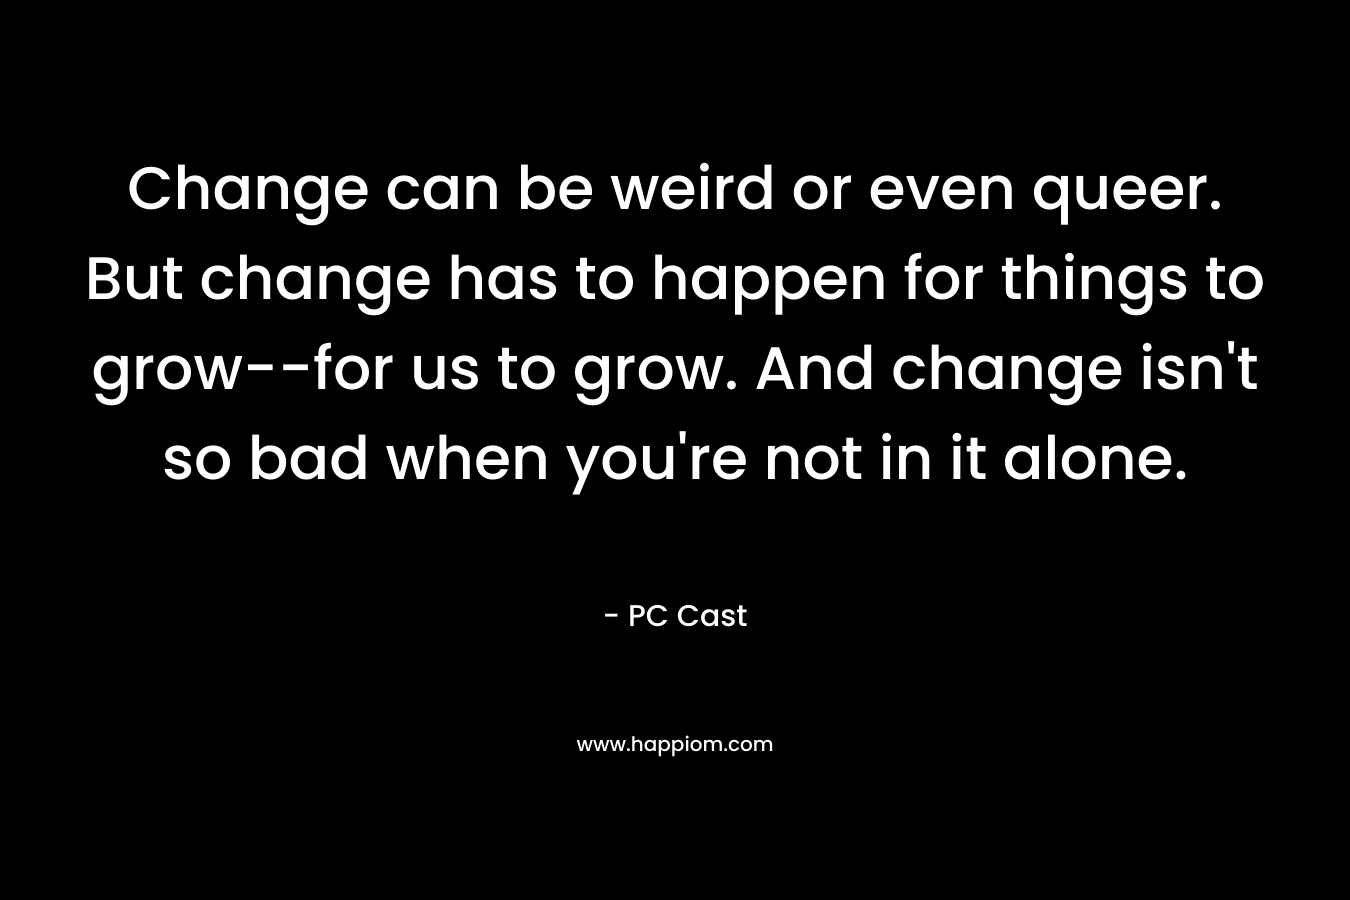 Change can be weird or even queer. But change has to happen for things to grow–for us to grow. And change isn’t so bad when you’re not in it alone. – PC Cast